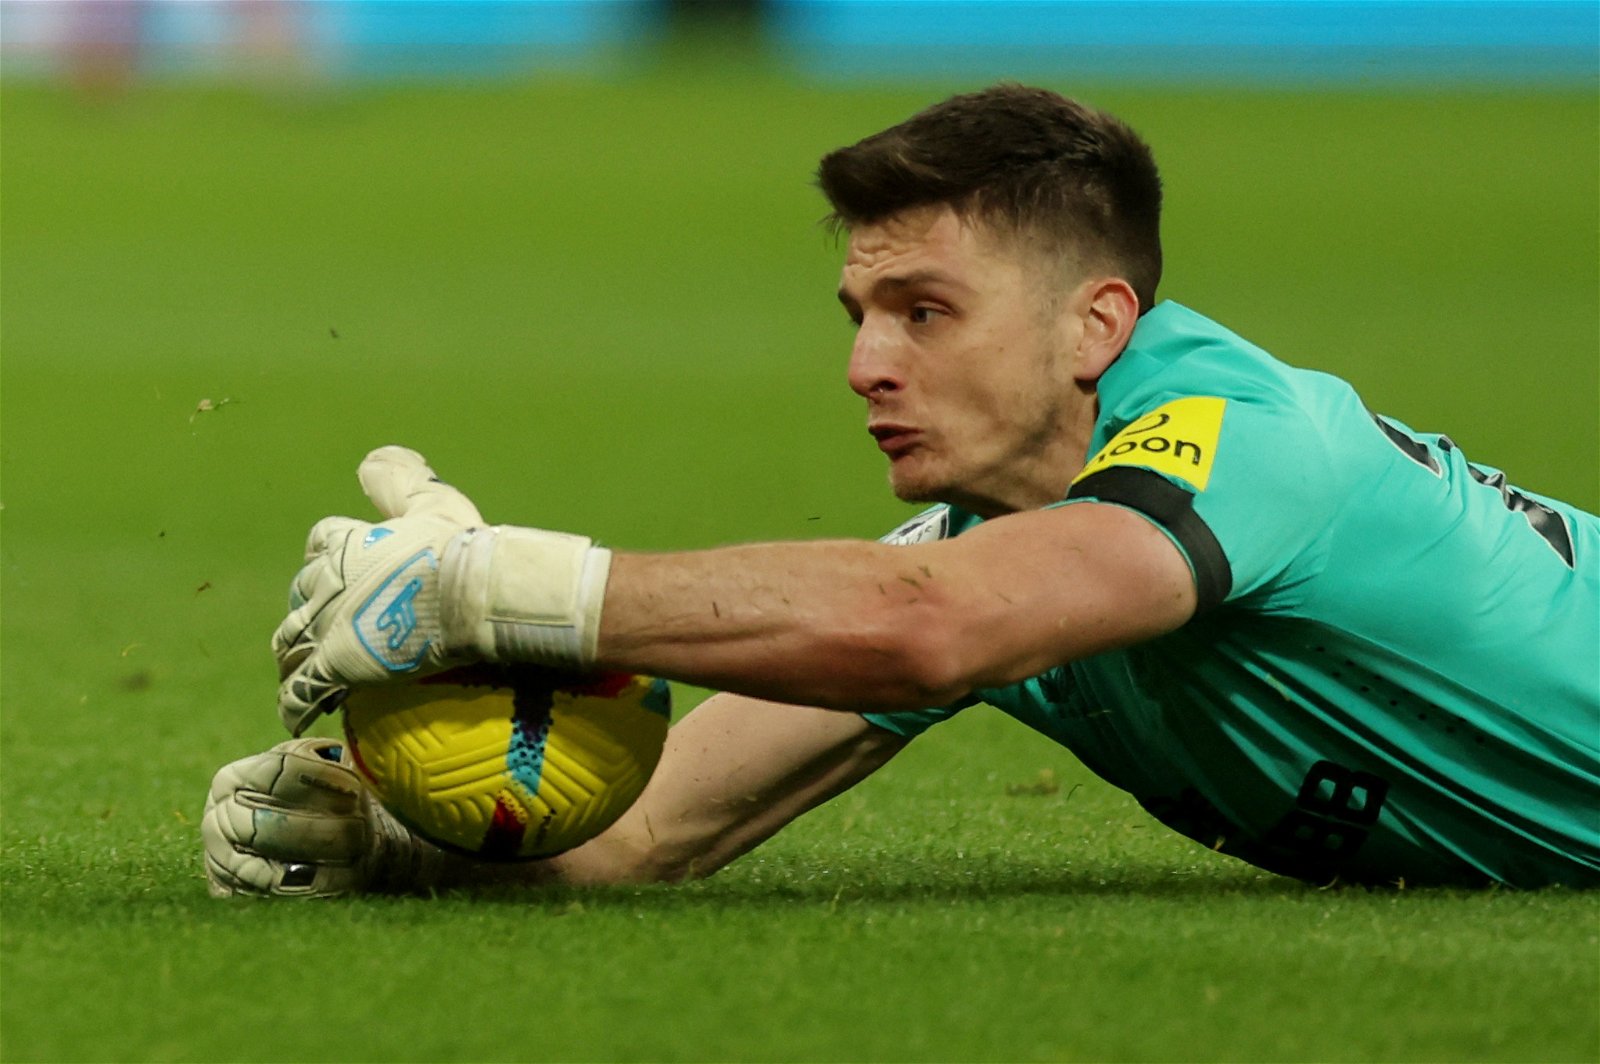 Newcastle United's Nick Pope handles the ball outside the area and is subsequently shown a red card by referee Anthony Taylor